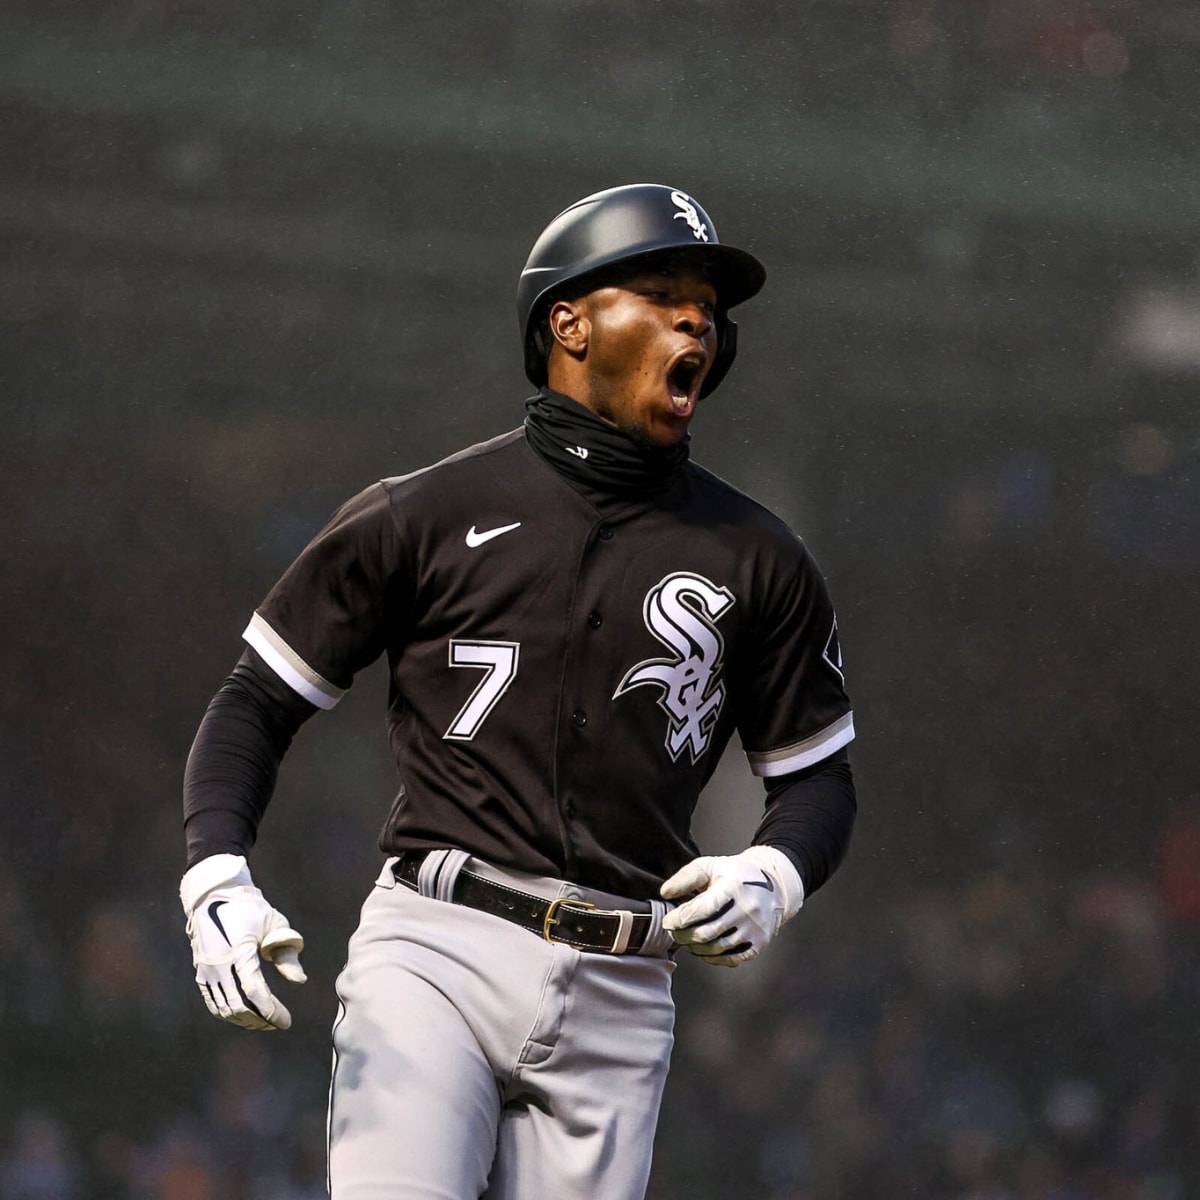 Anderson homers as White Sox beat Cubs 3-1 at rainy Wrigley